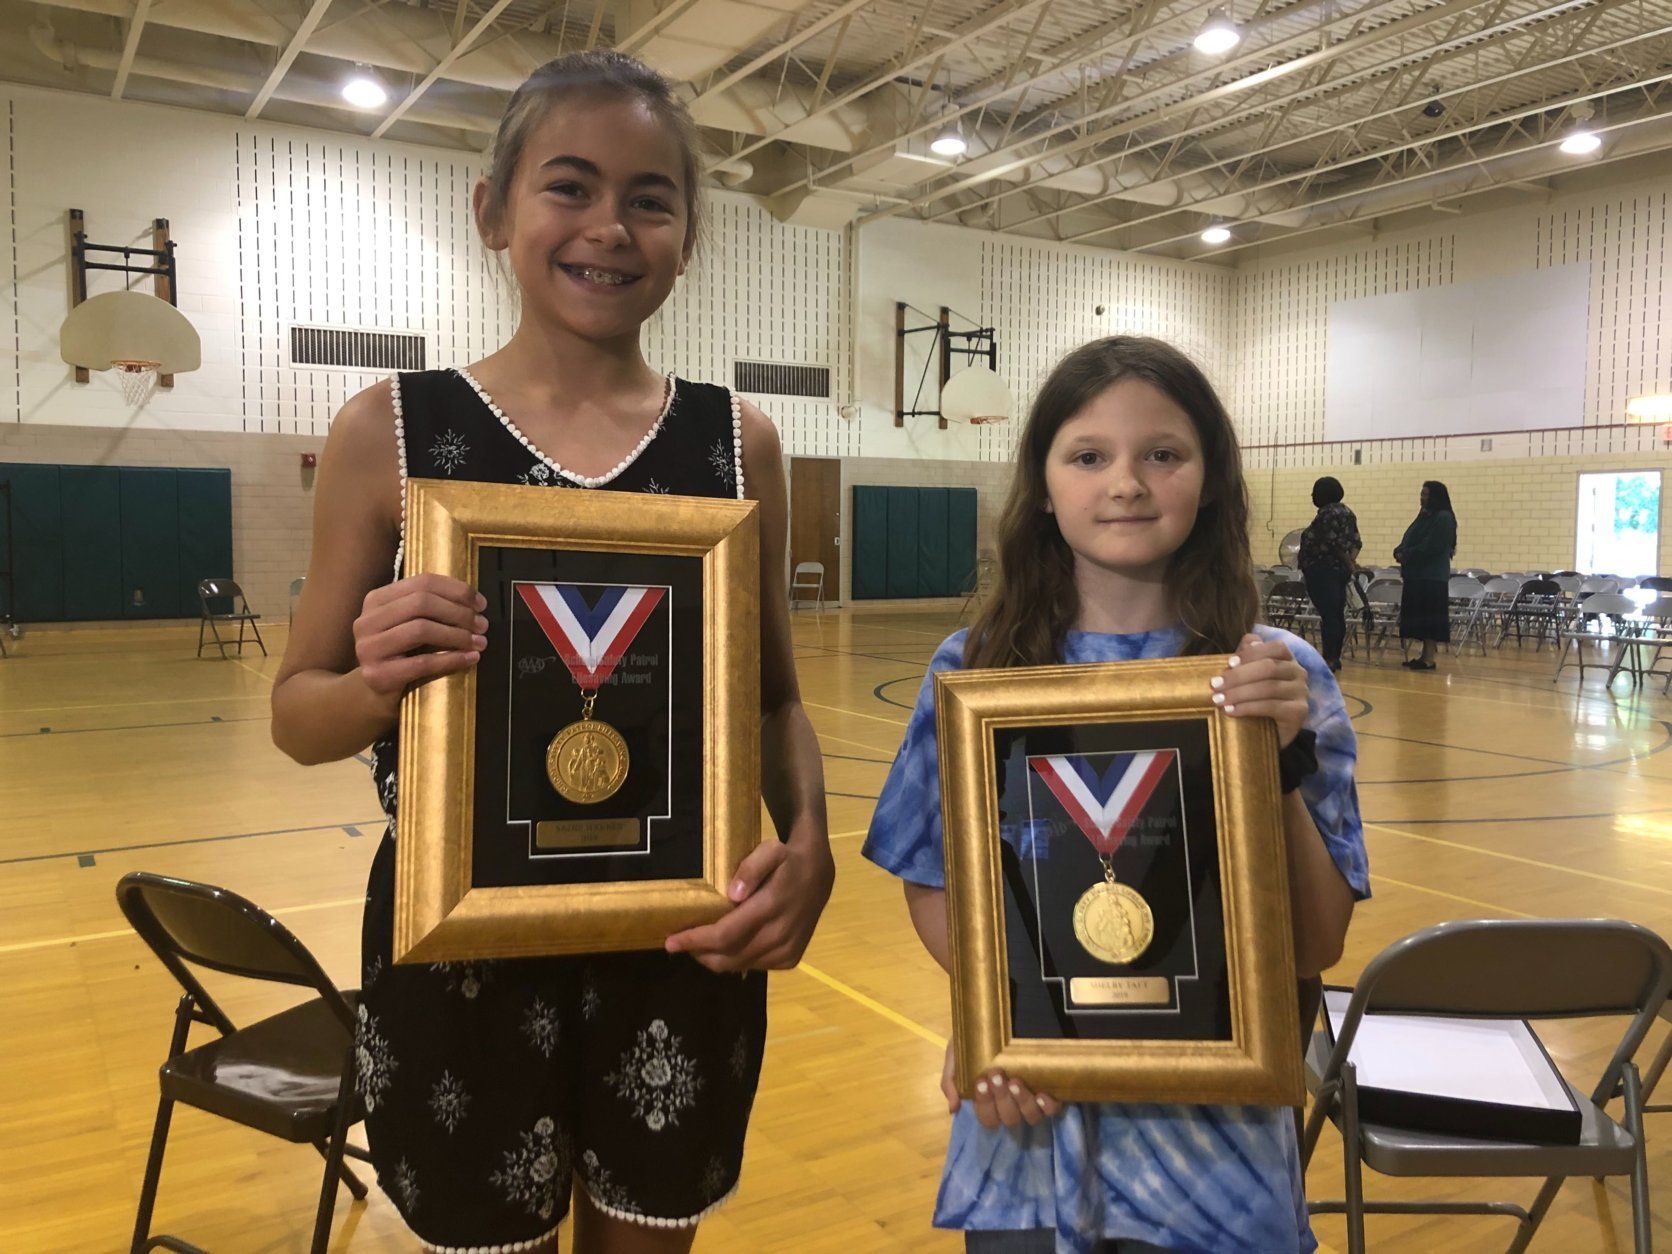 Sadie Haynes, left, and Shelby Taft pose with their Lifesaving Medals, presented by AAA, on Tuesday, June 11, 2019 in Silver Spring, Maryland. (WTOP/Melissa Howell)